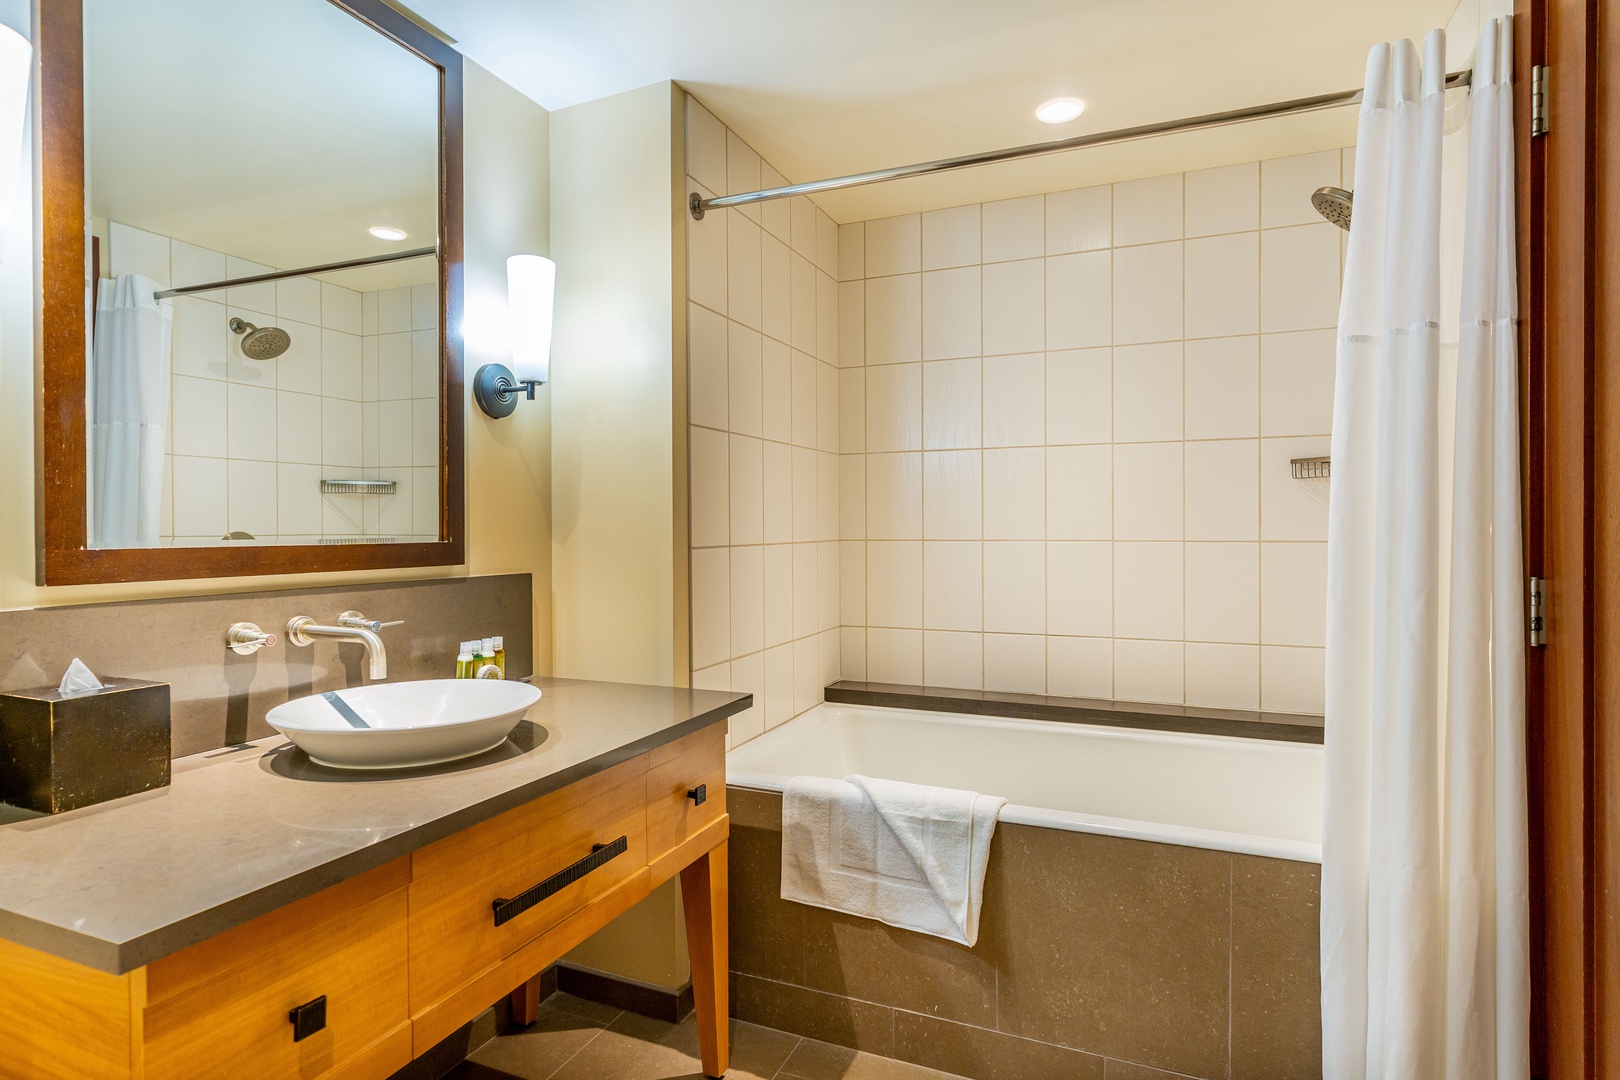 Kapolei Vacation Rentals, Ko Olina Beach Villas B102 - The second guest bathroom with all the amenities to relax and unwind.